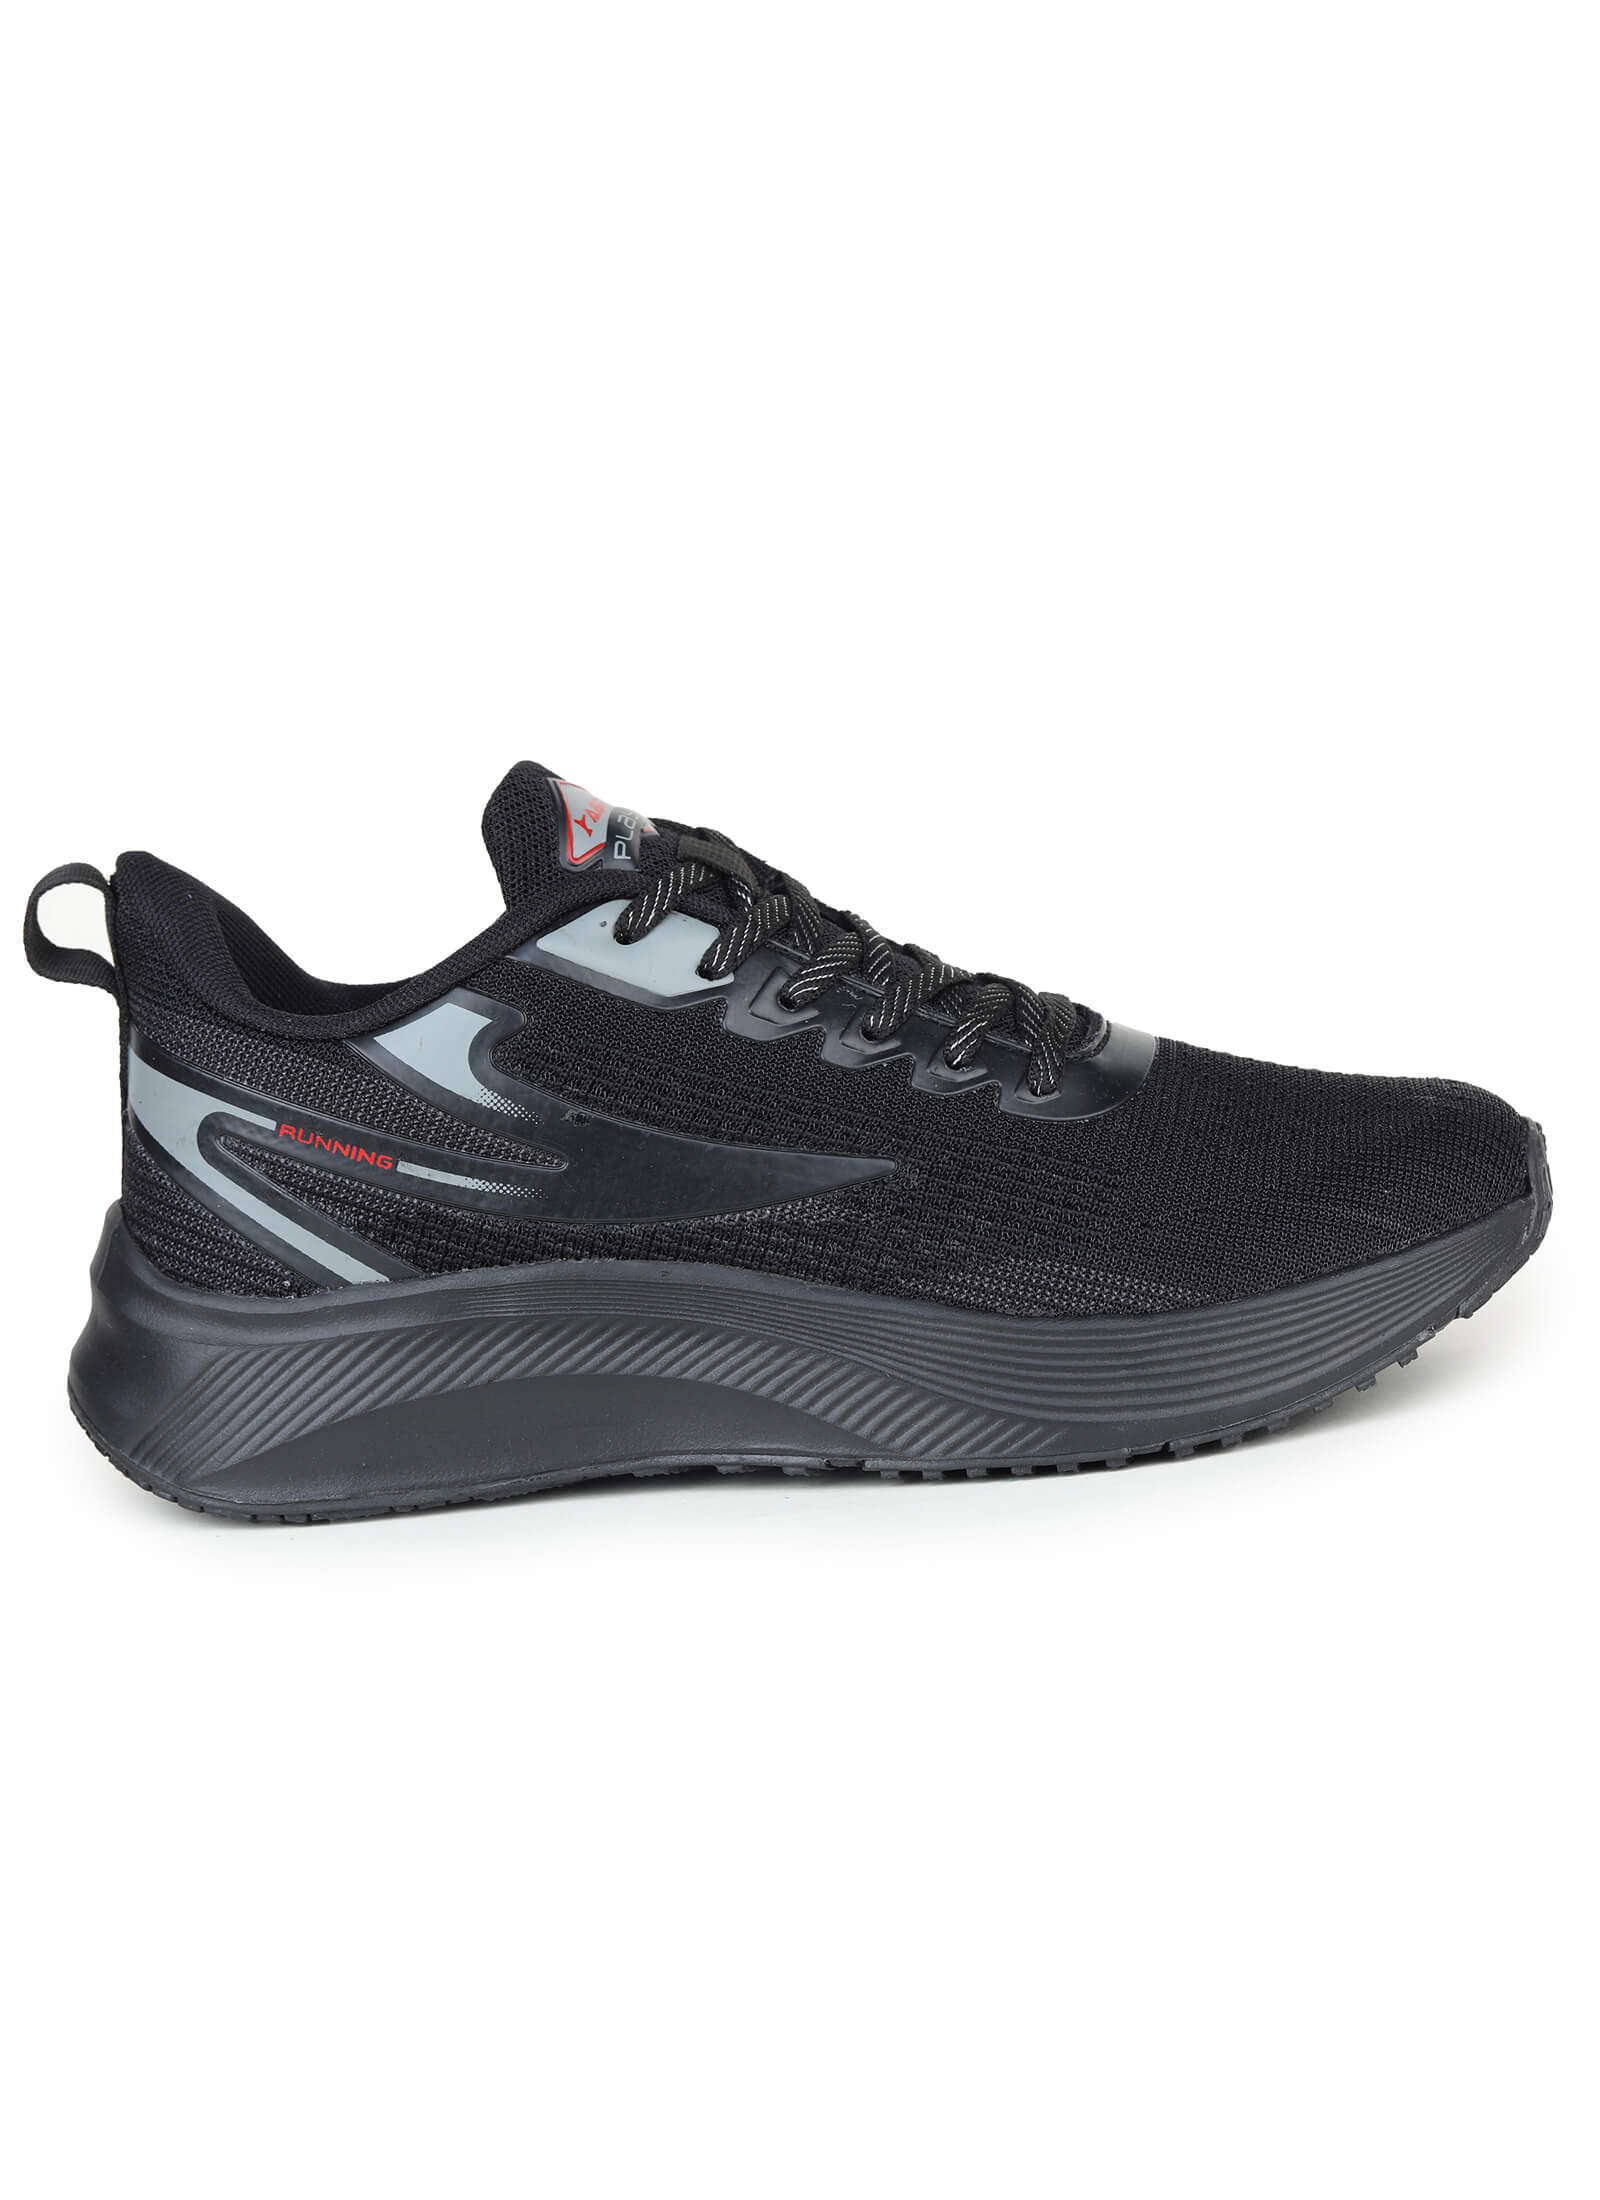 Clay Sports Shoes For Men